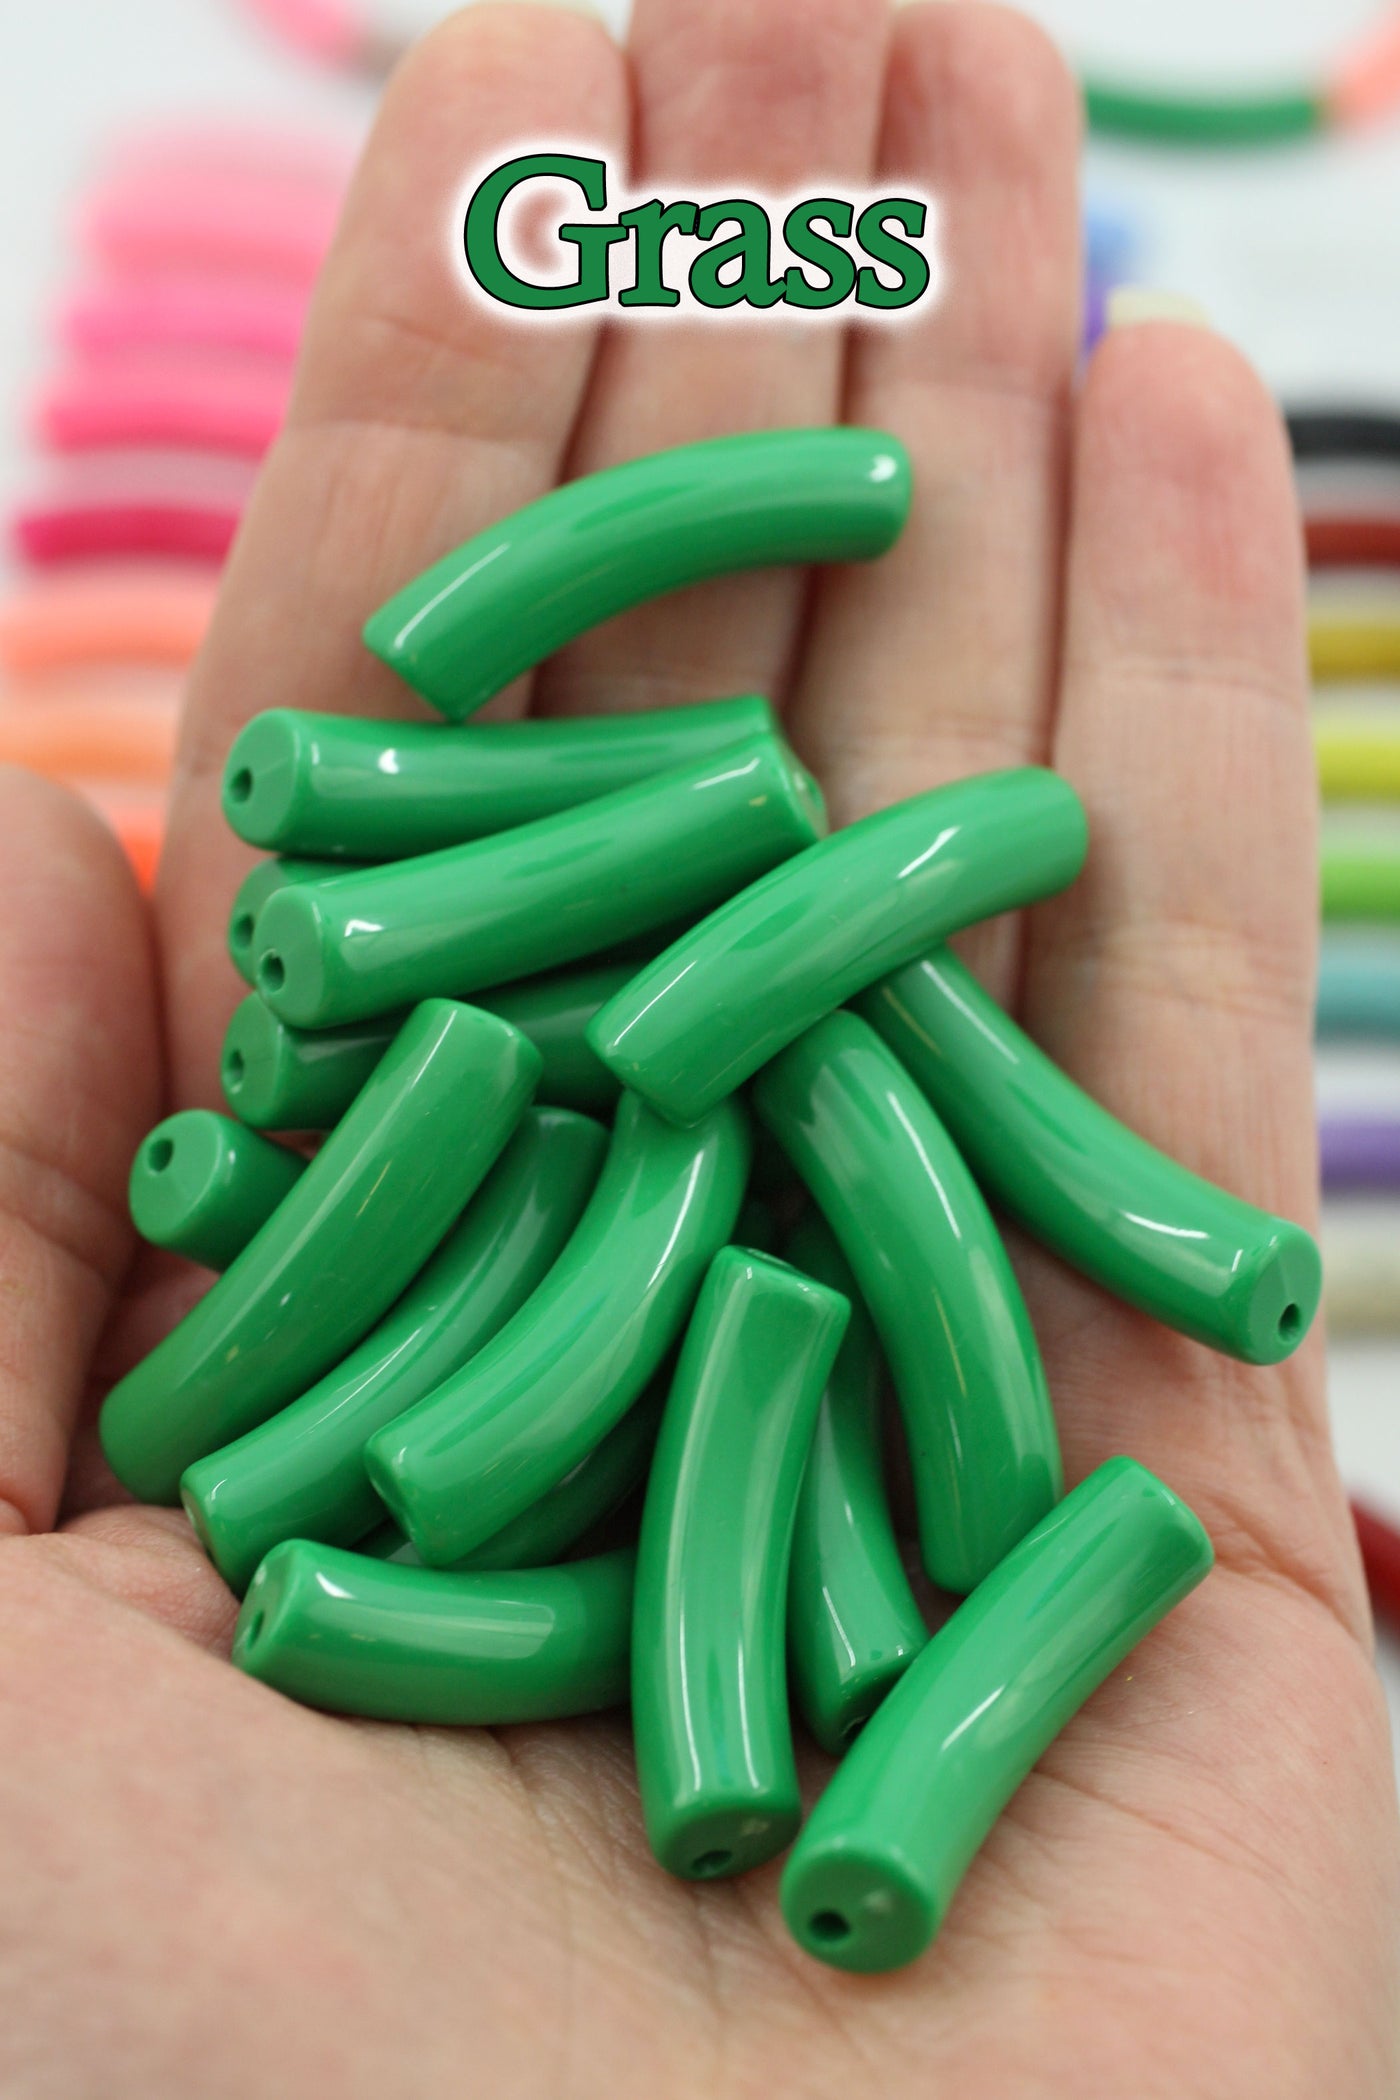 Wholesale Skinny Acrylic Bamboo Beads, Curved Tube Beads, 8mm, 1 pc.